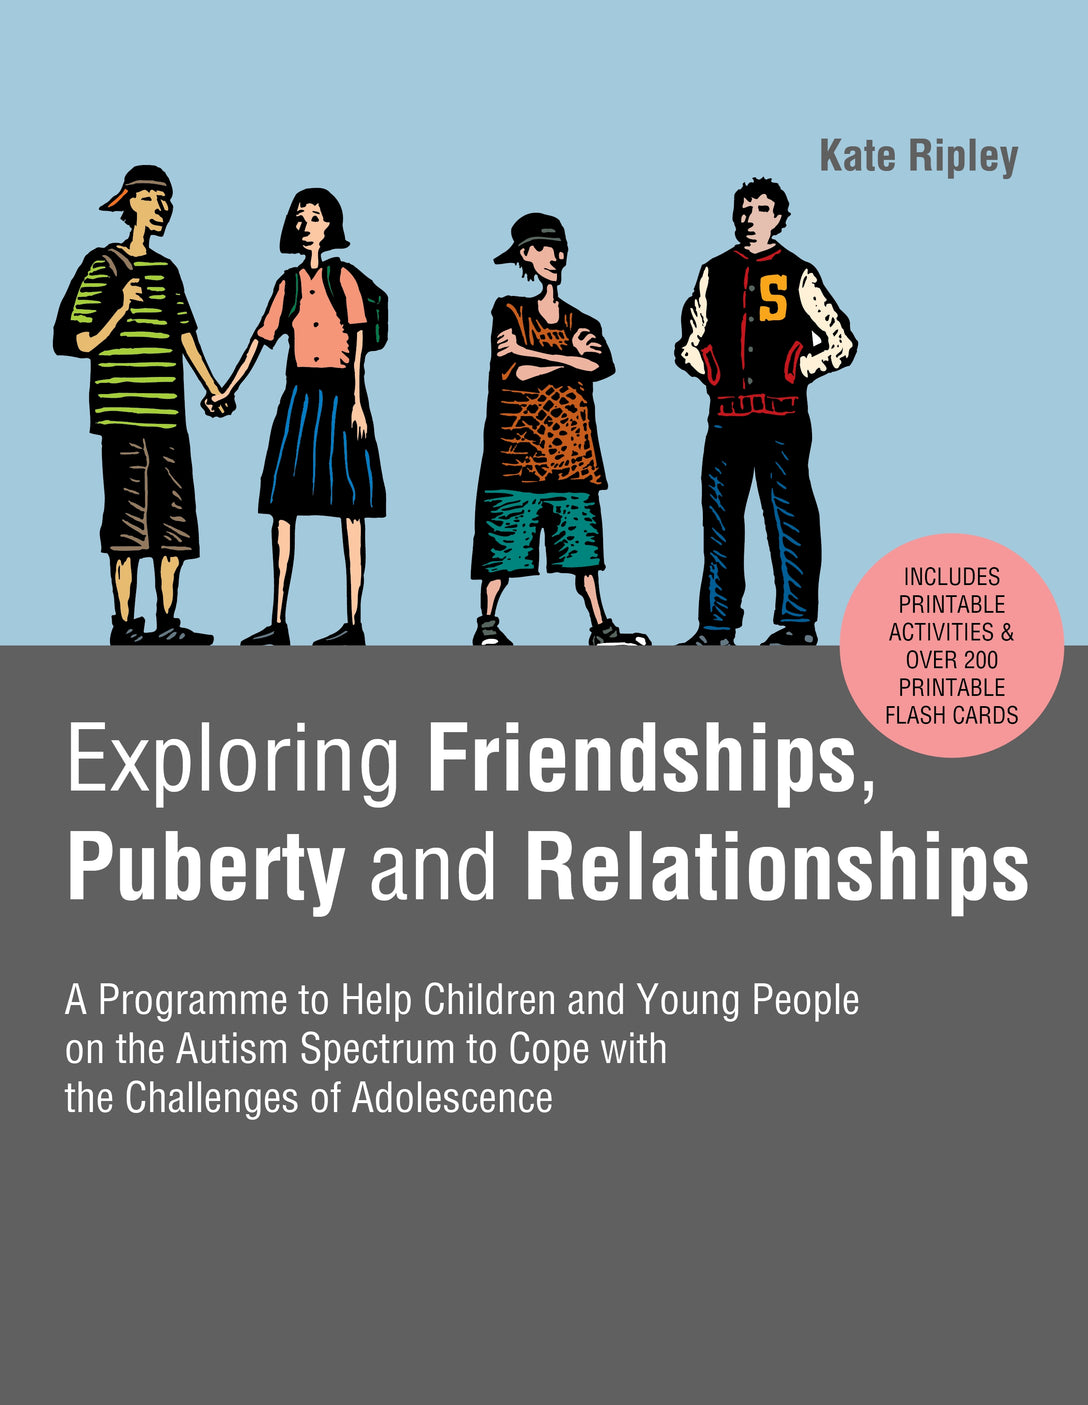 Exploring Friendships, Puberty and Relationships by Kate Ripley